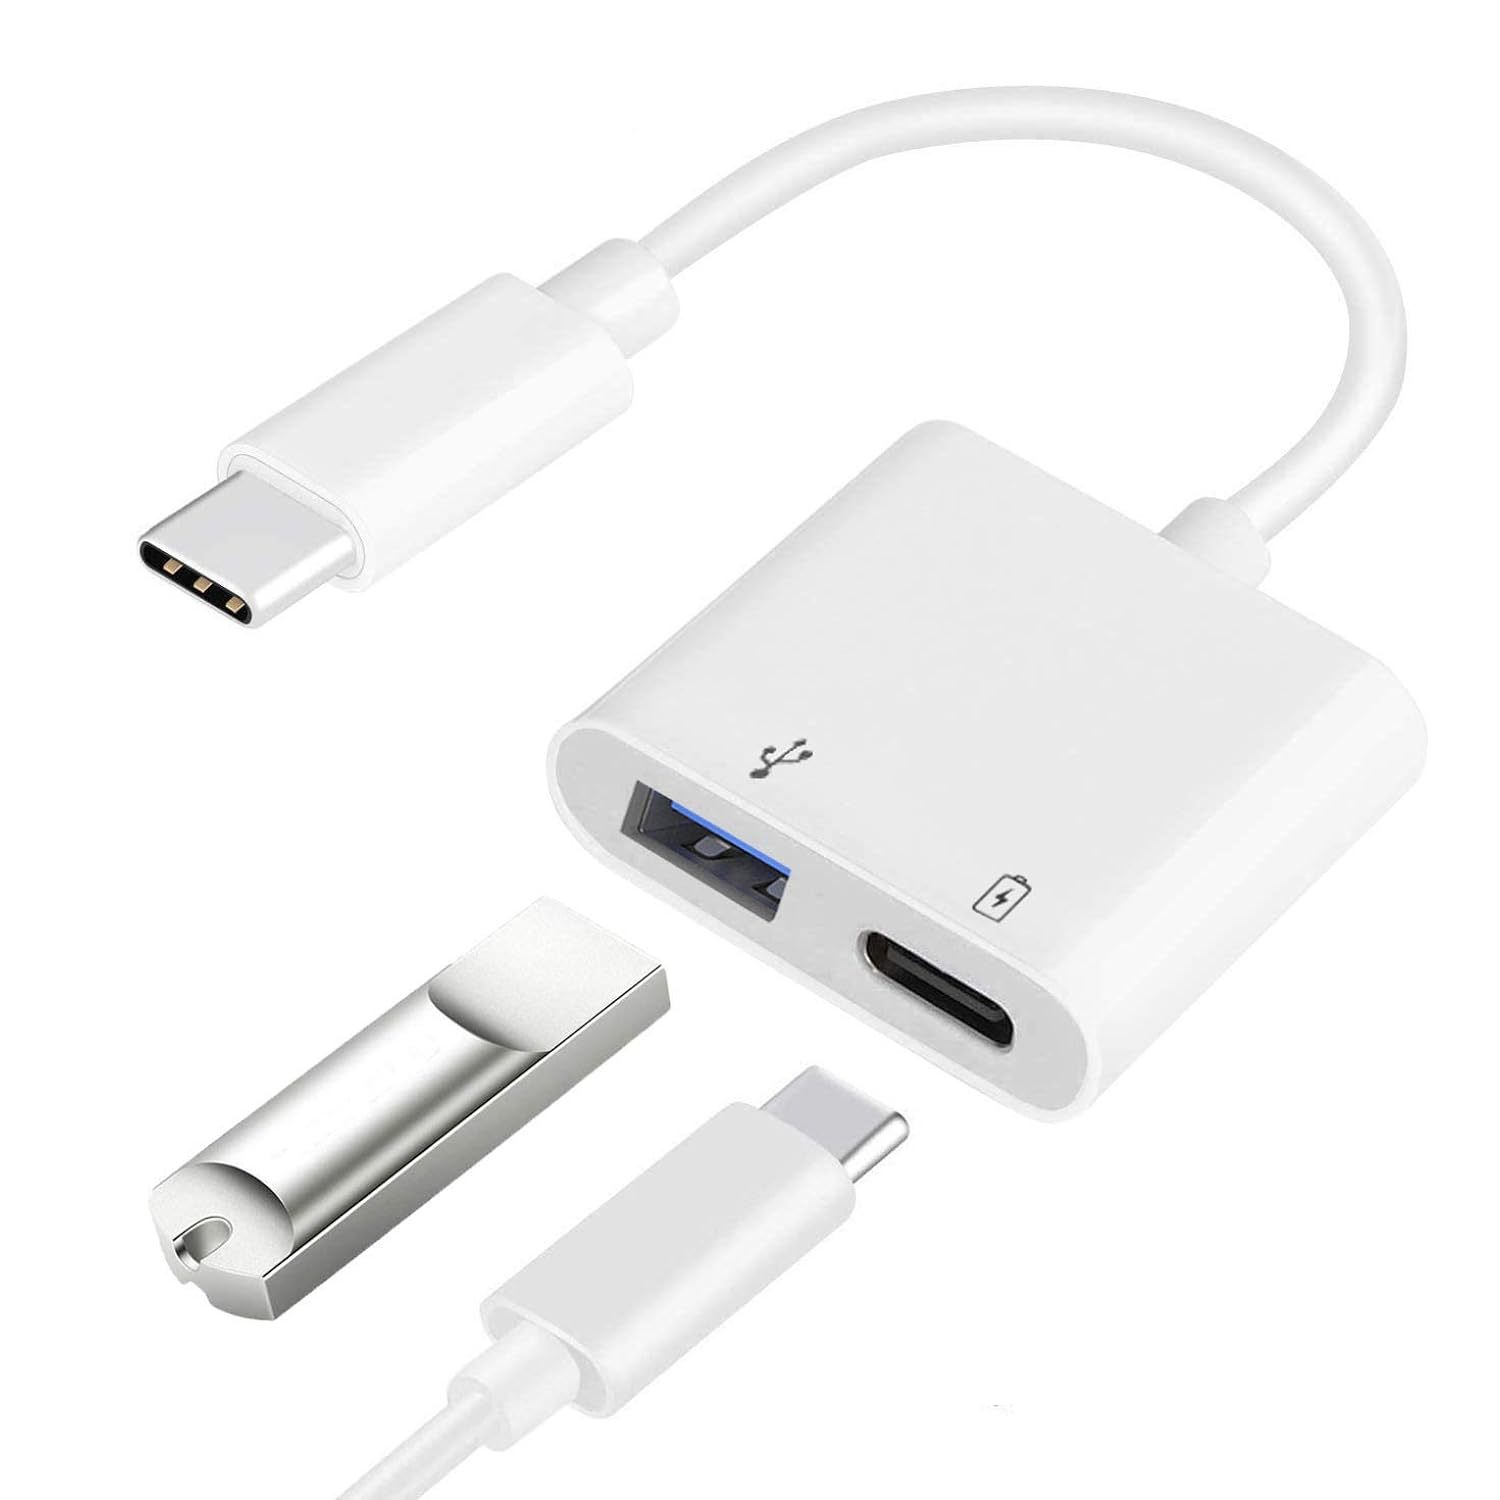 Primary image for Usb C Otg Adapter With Power, 2 In 1 Usb C To Usb Female With 60W Pd Charging Ad